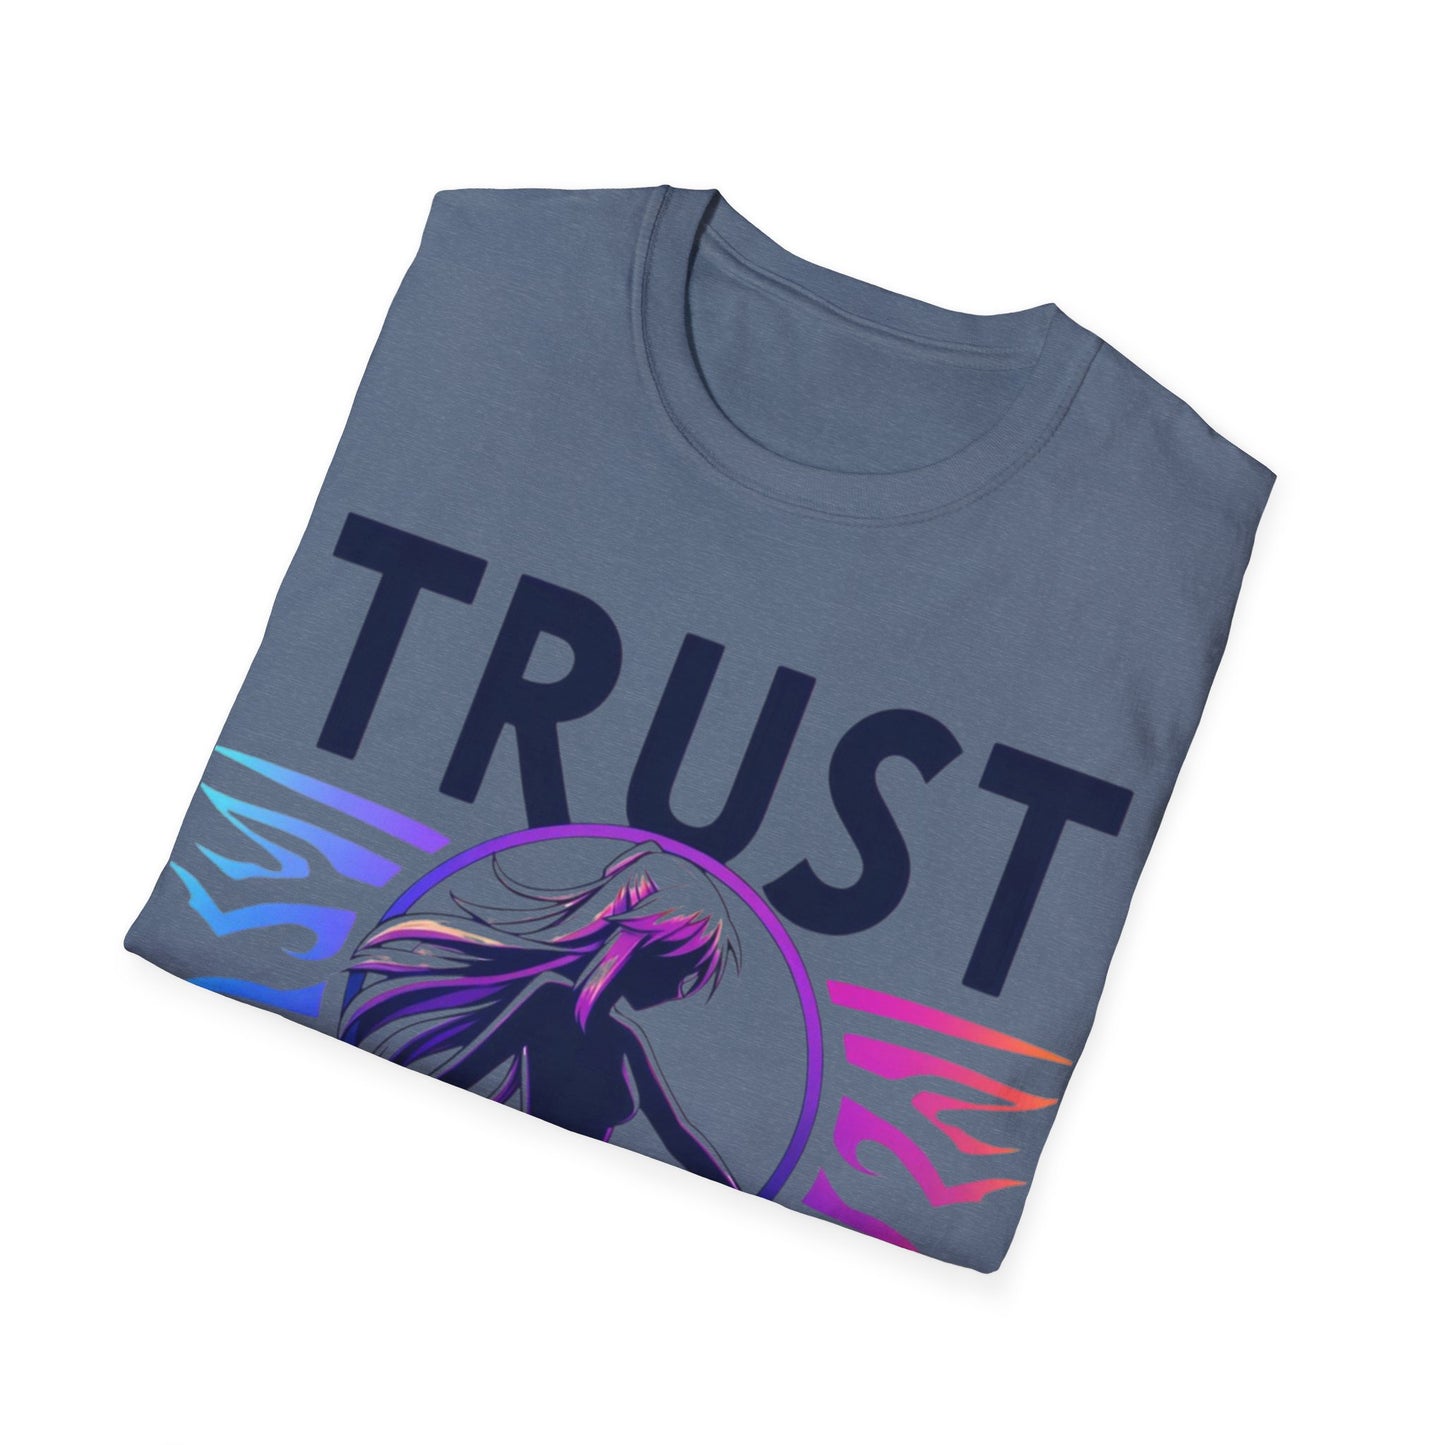 Trust Women! Bold Statement Soft Style T-Shirt: Protest, Demand Equality! Political Shirt!